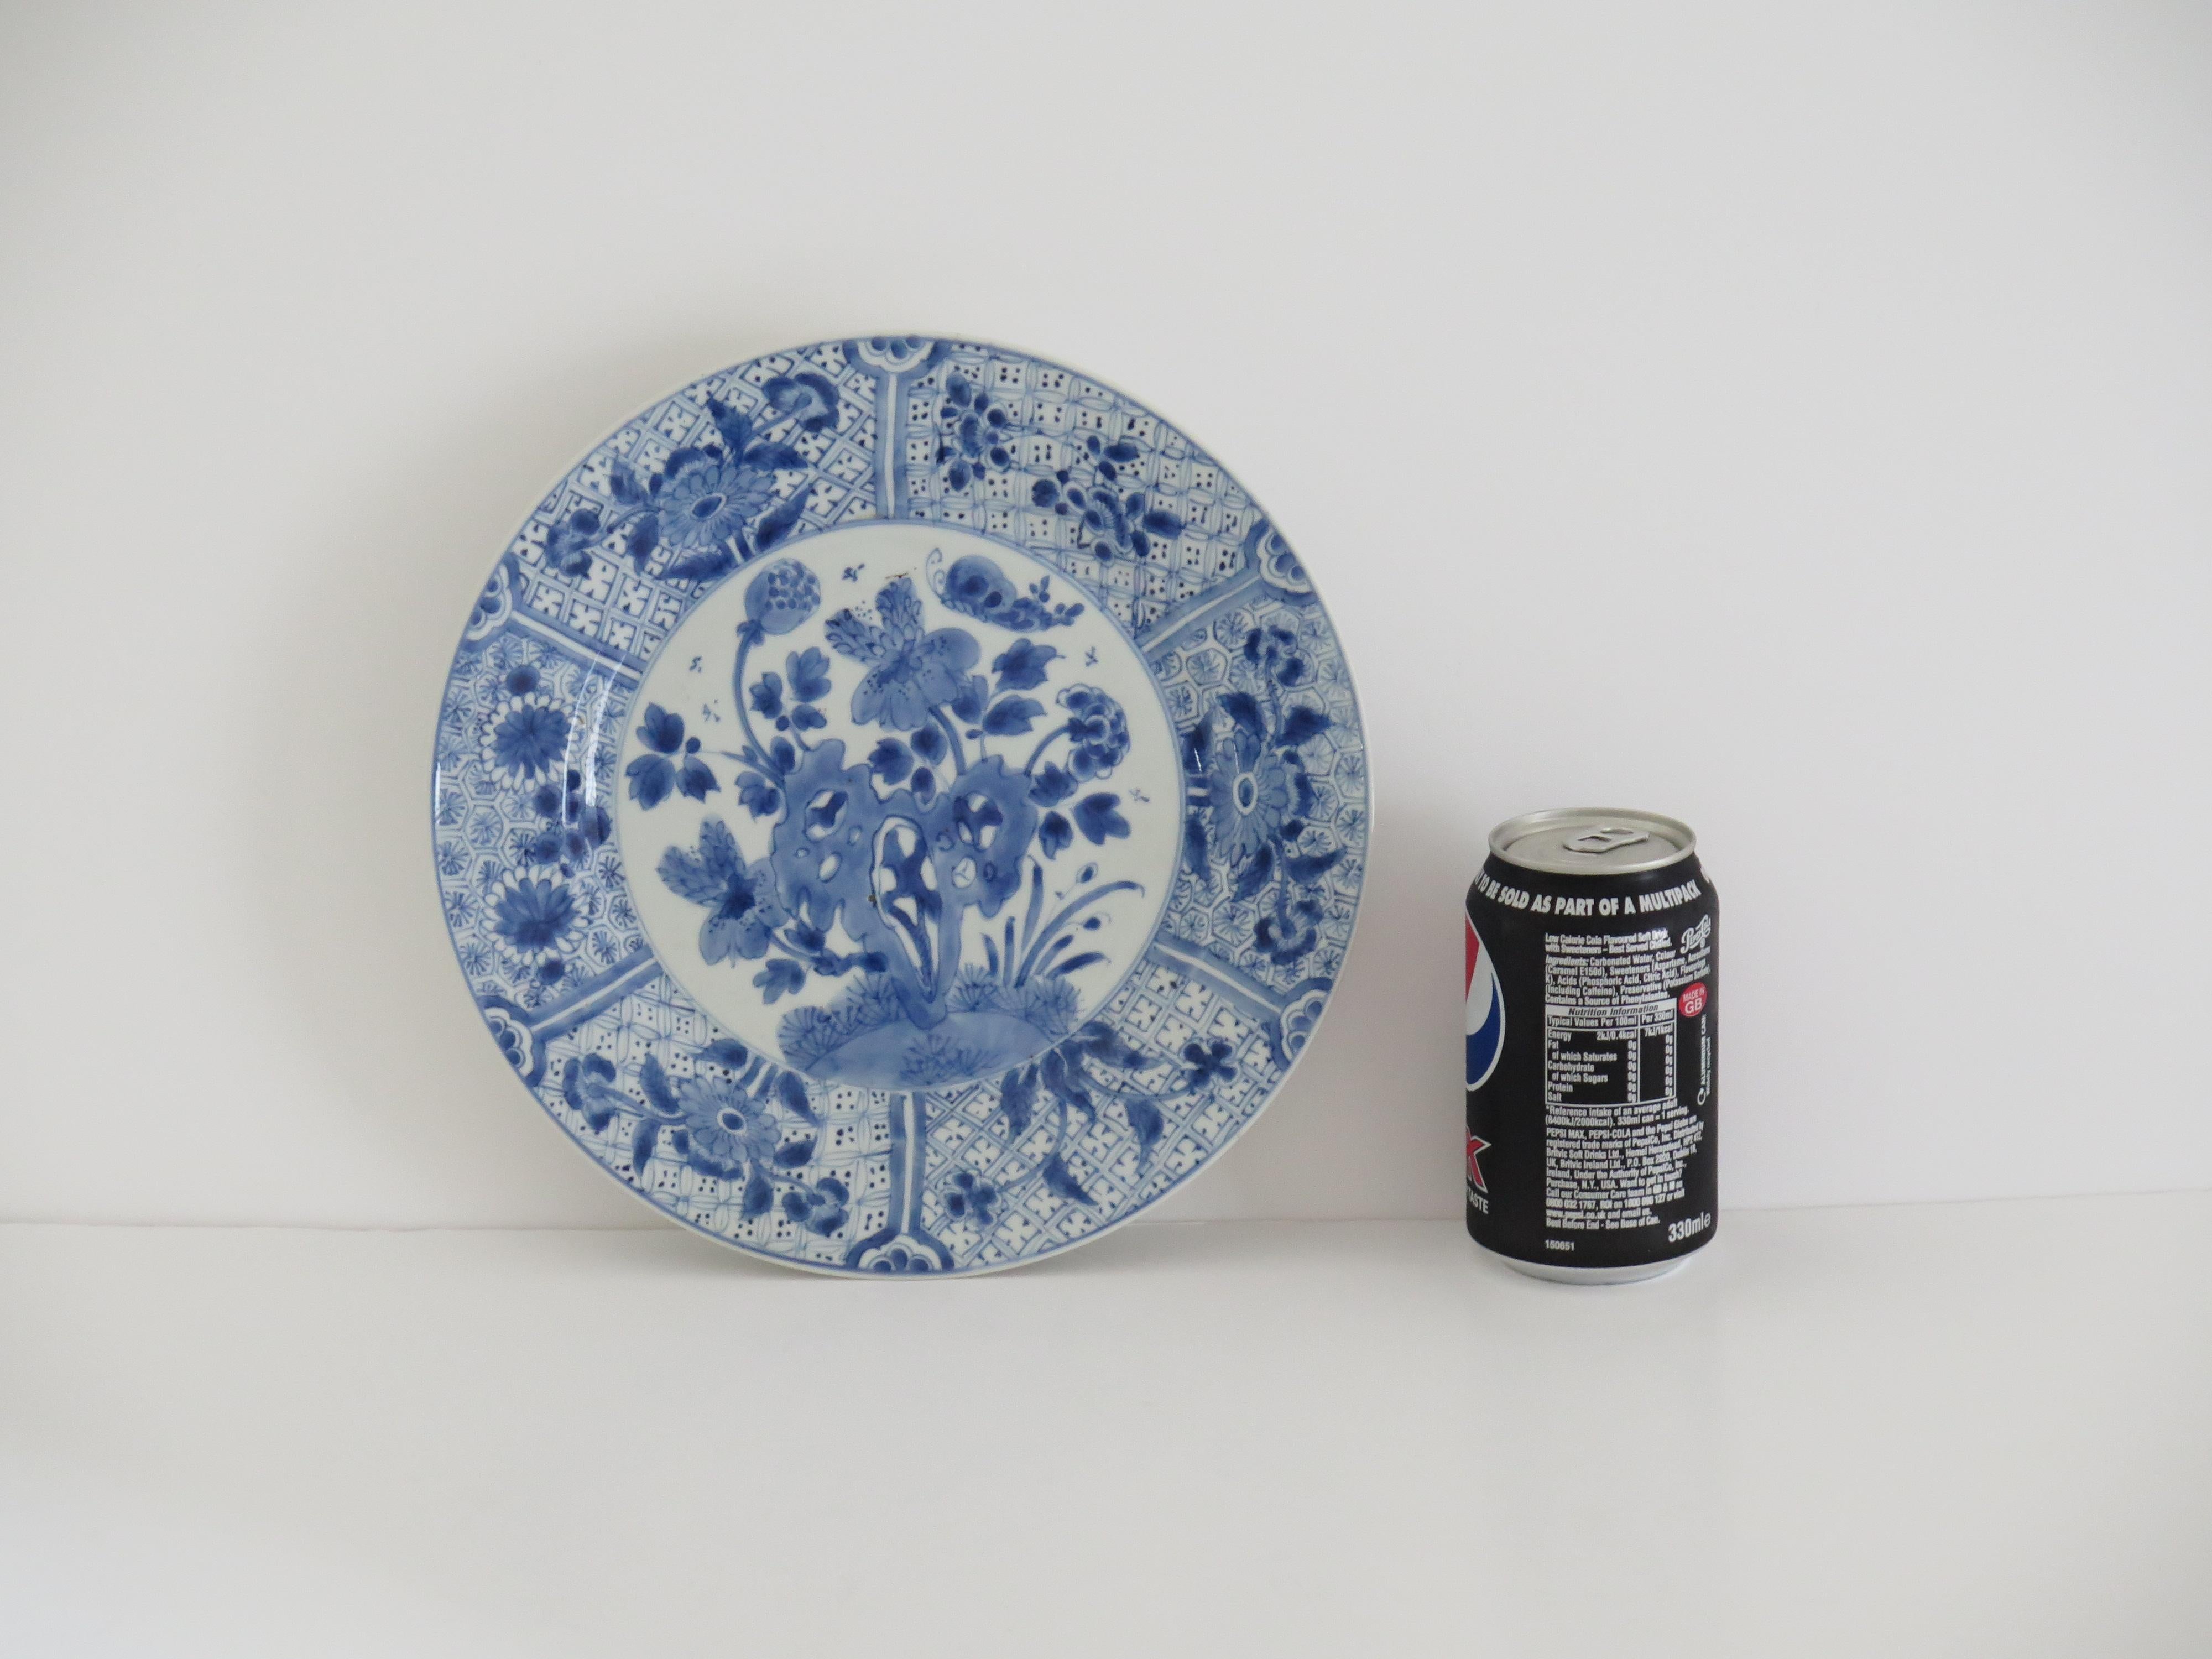 Chinese Kangxi Mark & period Plate or Dish Porcelain Blue & White, Ca 1700 For Sale 14